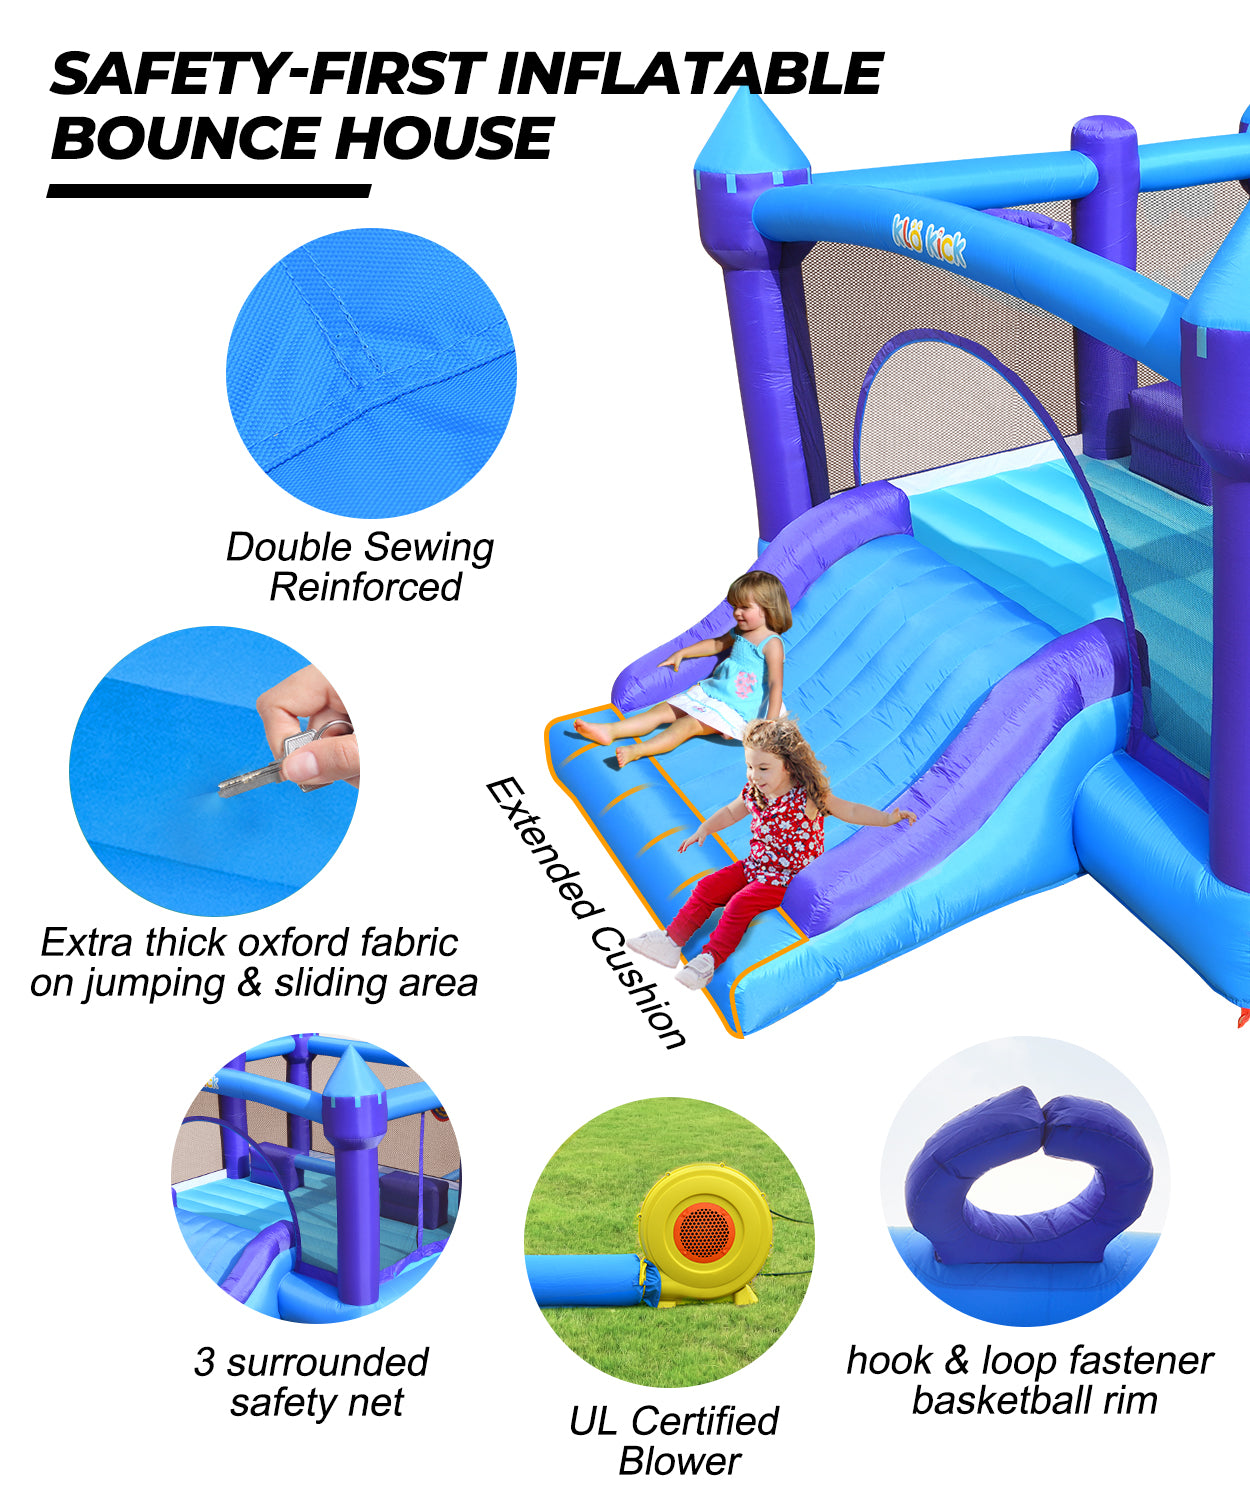 Klo Kick Bounce House for Big Kids 8-12, Inflatable Bouncy Castle 15' x 12' with Blower, Bouncer with Wider Slide